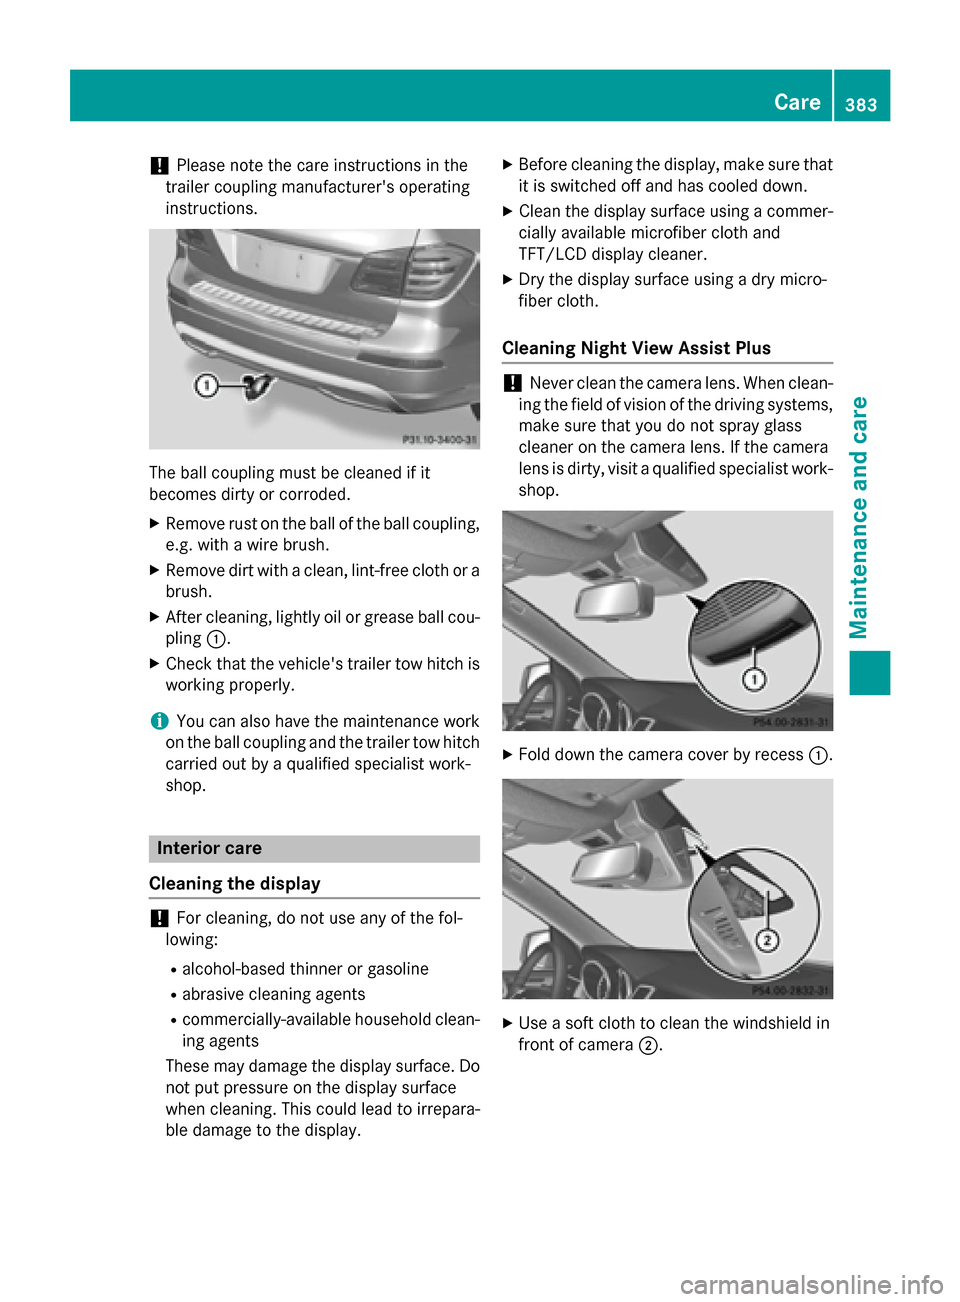 MERCEDES-BENZ GL-Class 2015 X166 Owners Manual !
Please note the care instructions in the
trailer coupling manufacturers operating
instructions. The ball coupling must be cleaned if it
becomes dirty or corroded.
X Remove rust on the ball of the b